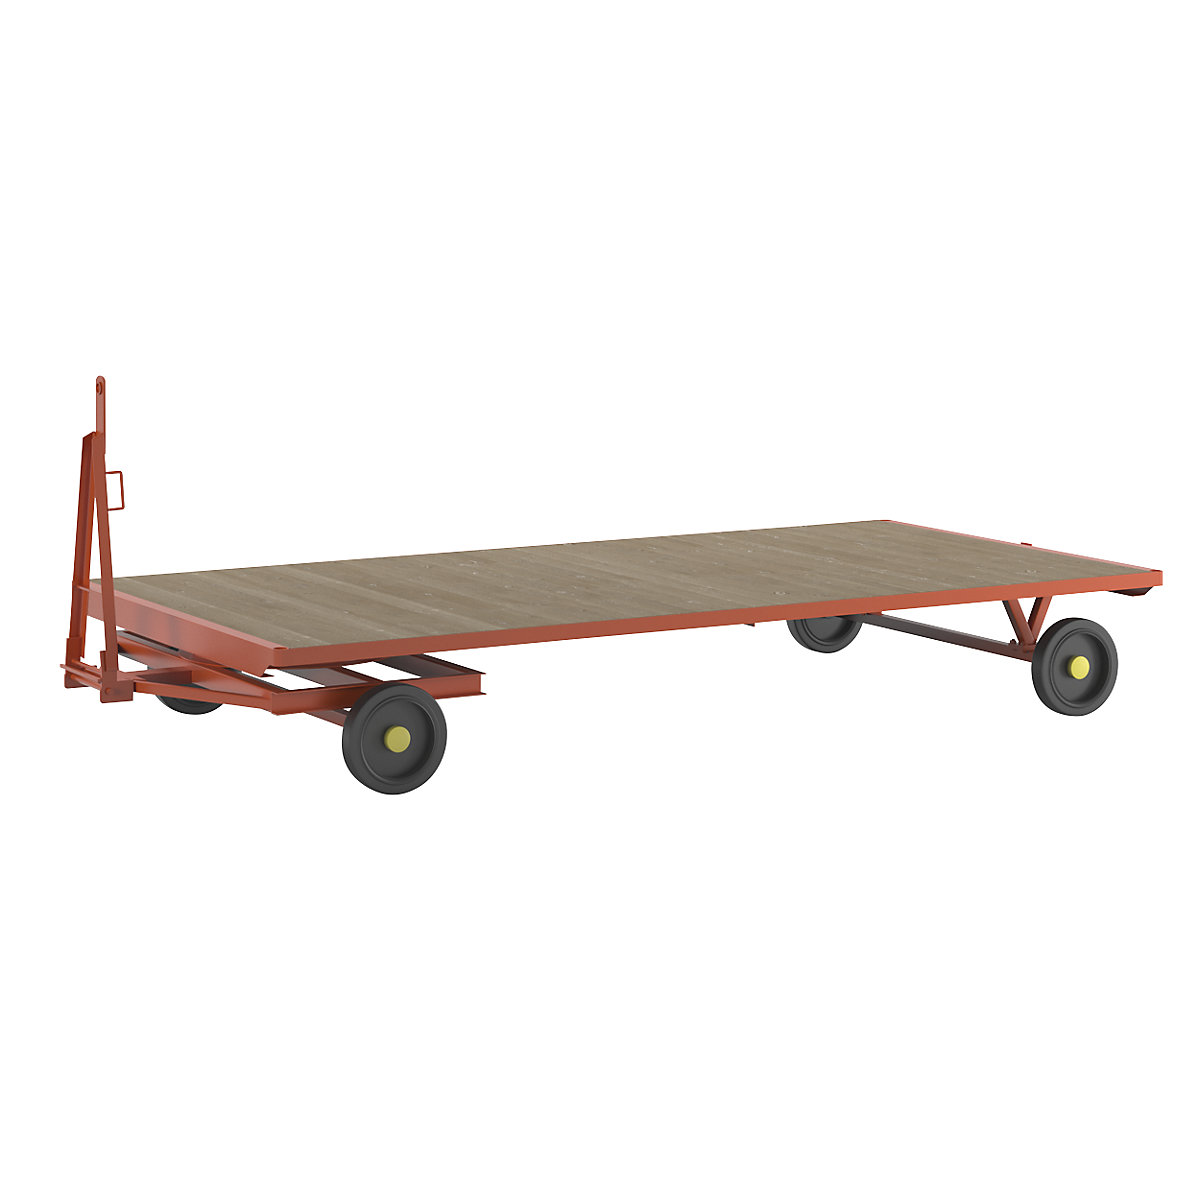 Trailer, 2-wheel turntable steering, max. load 3 t, platform 4.0 x 2.0 m, solid rubber tyres-4